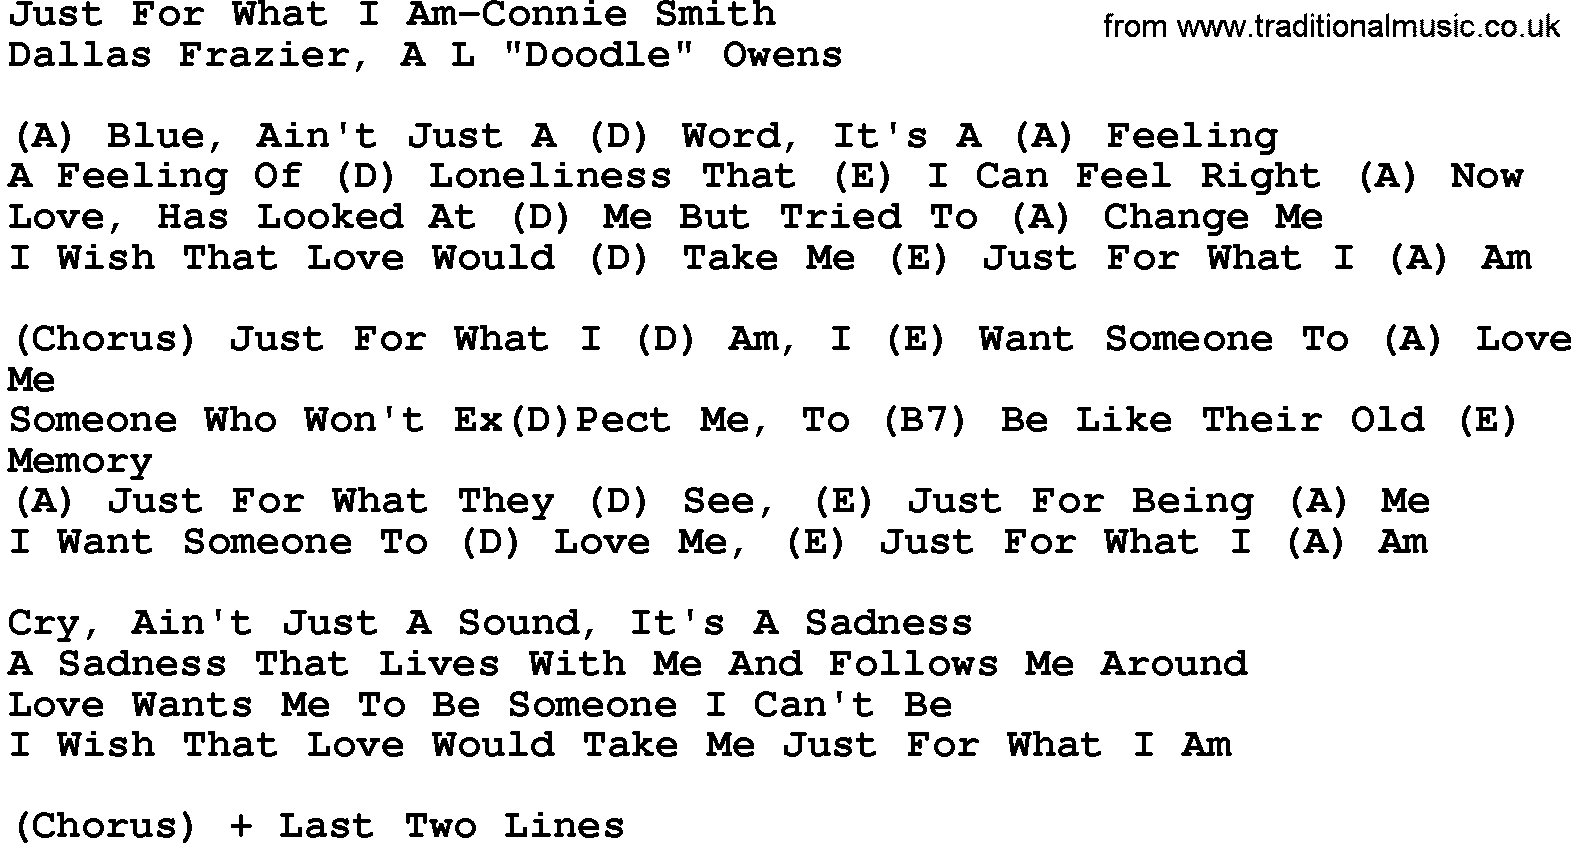 Country music song: Just For What I Am-Connie Smith lyrics and chords